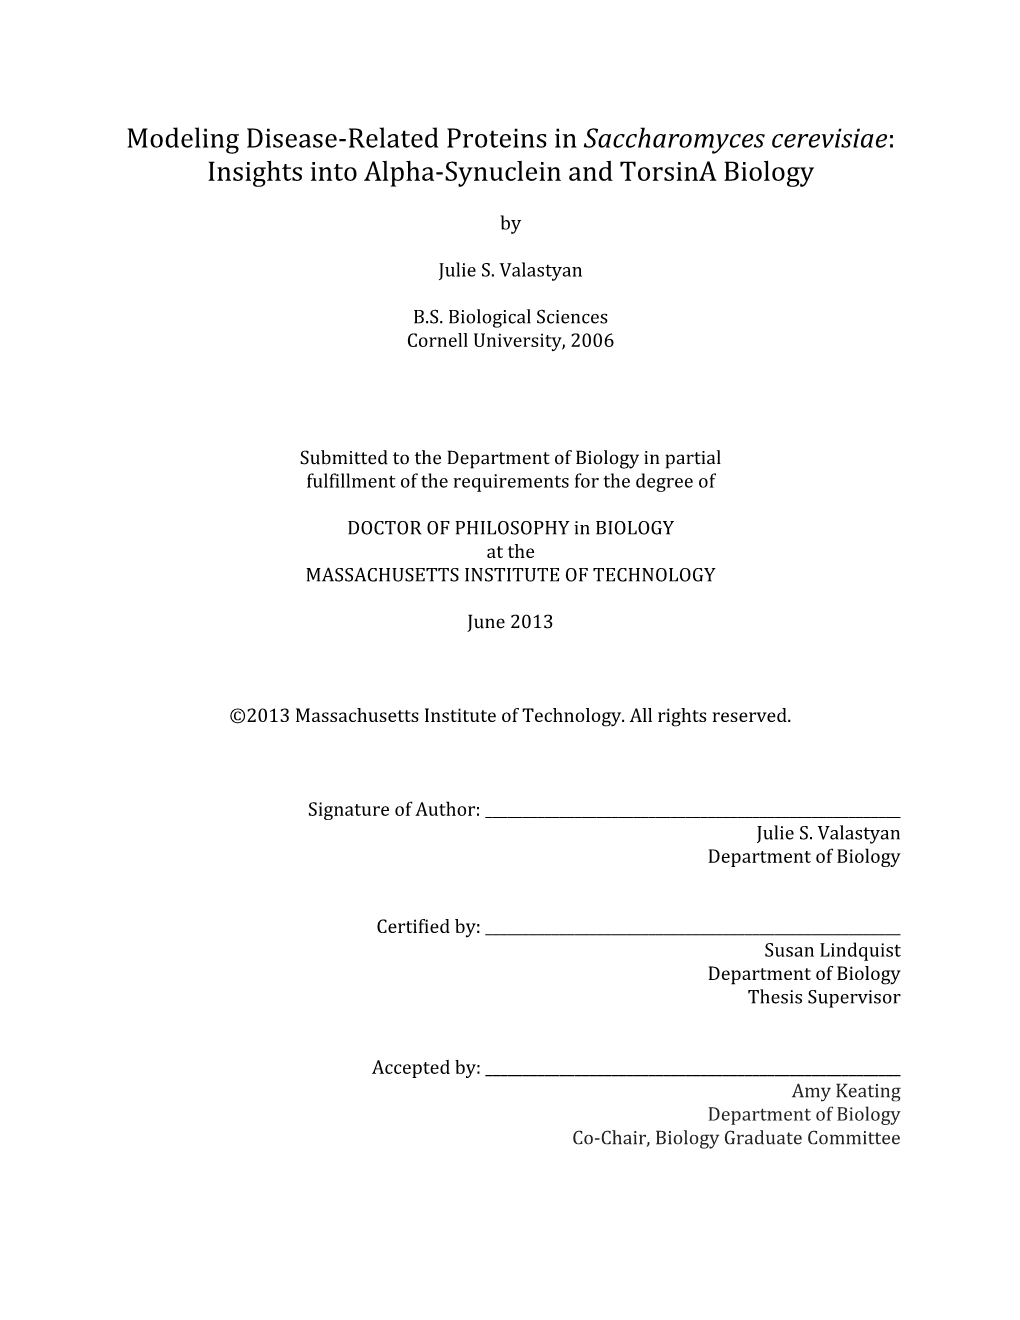 Insights Into Alpha-Synuclein and Torsina Biology